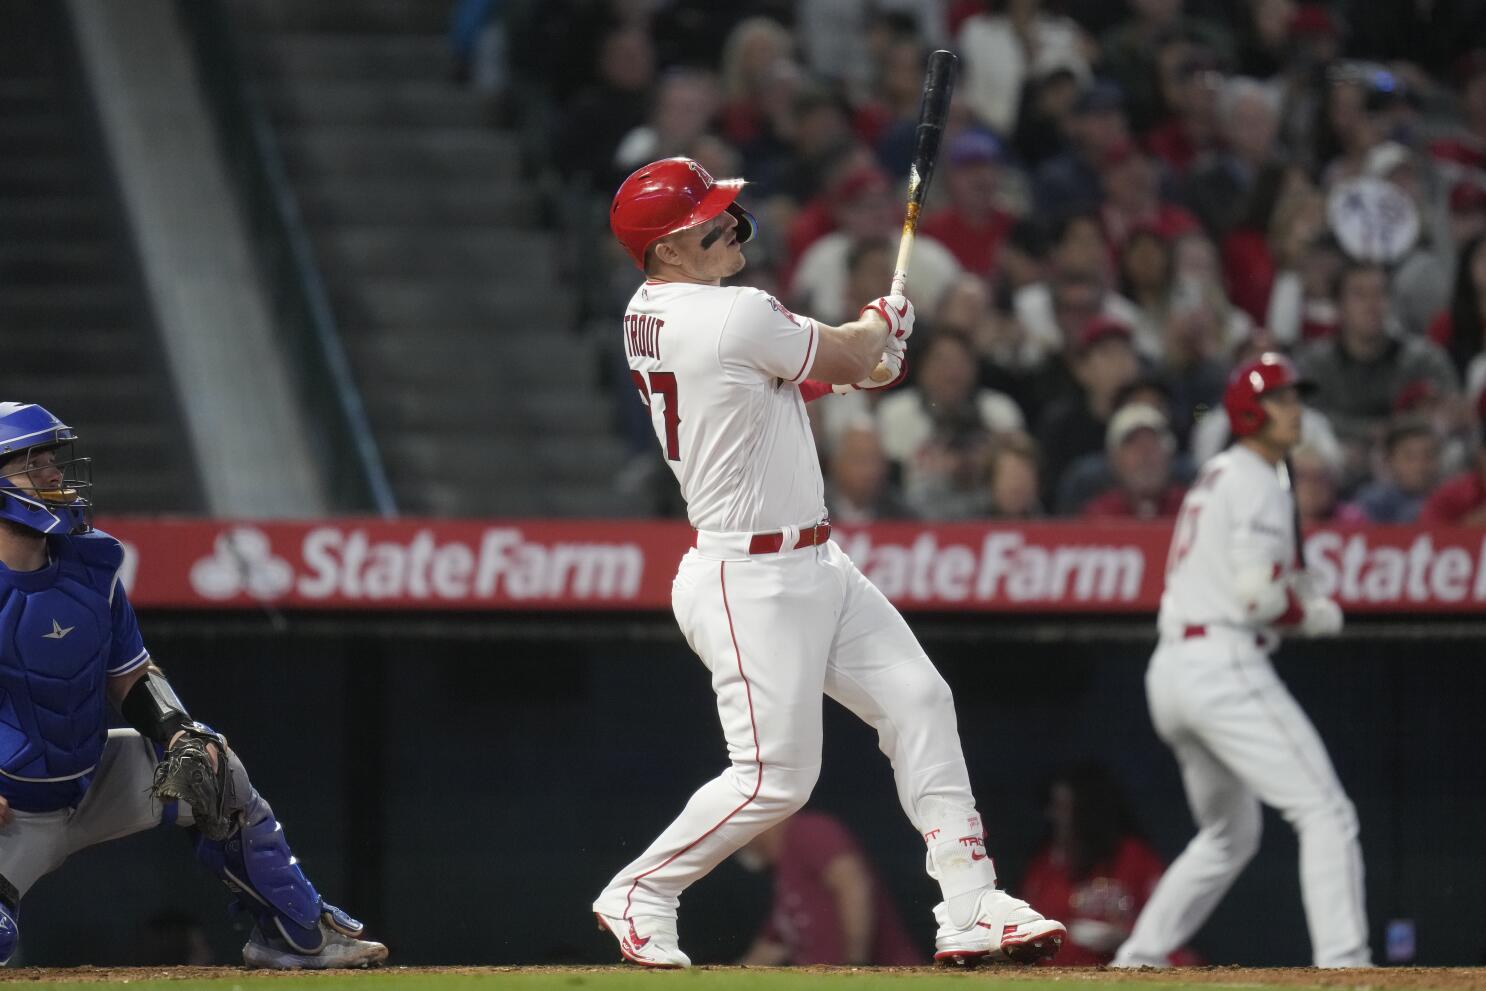 Luis Rengifo, Mike Trout and Hunter Renfroe power Angels to win